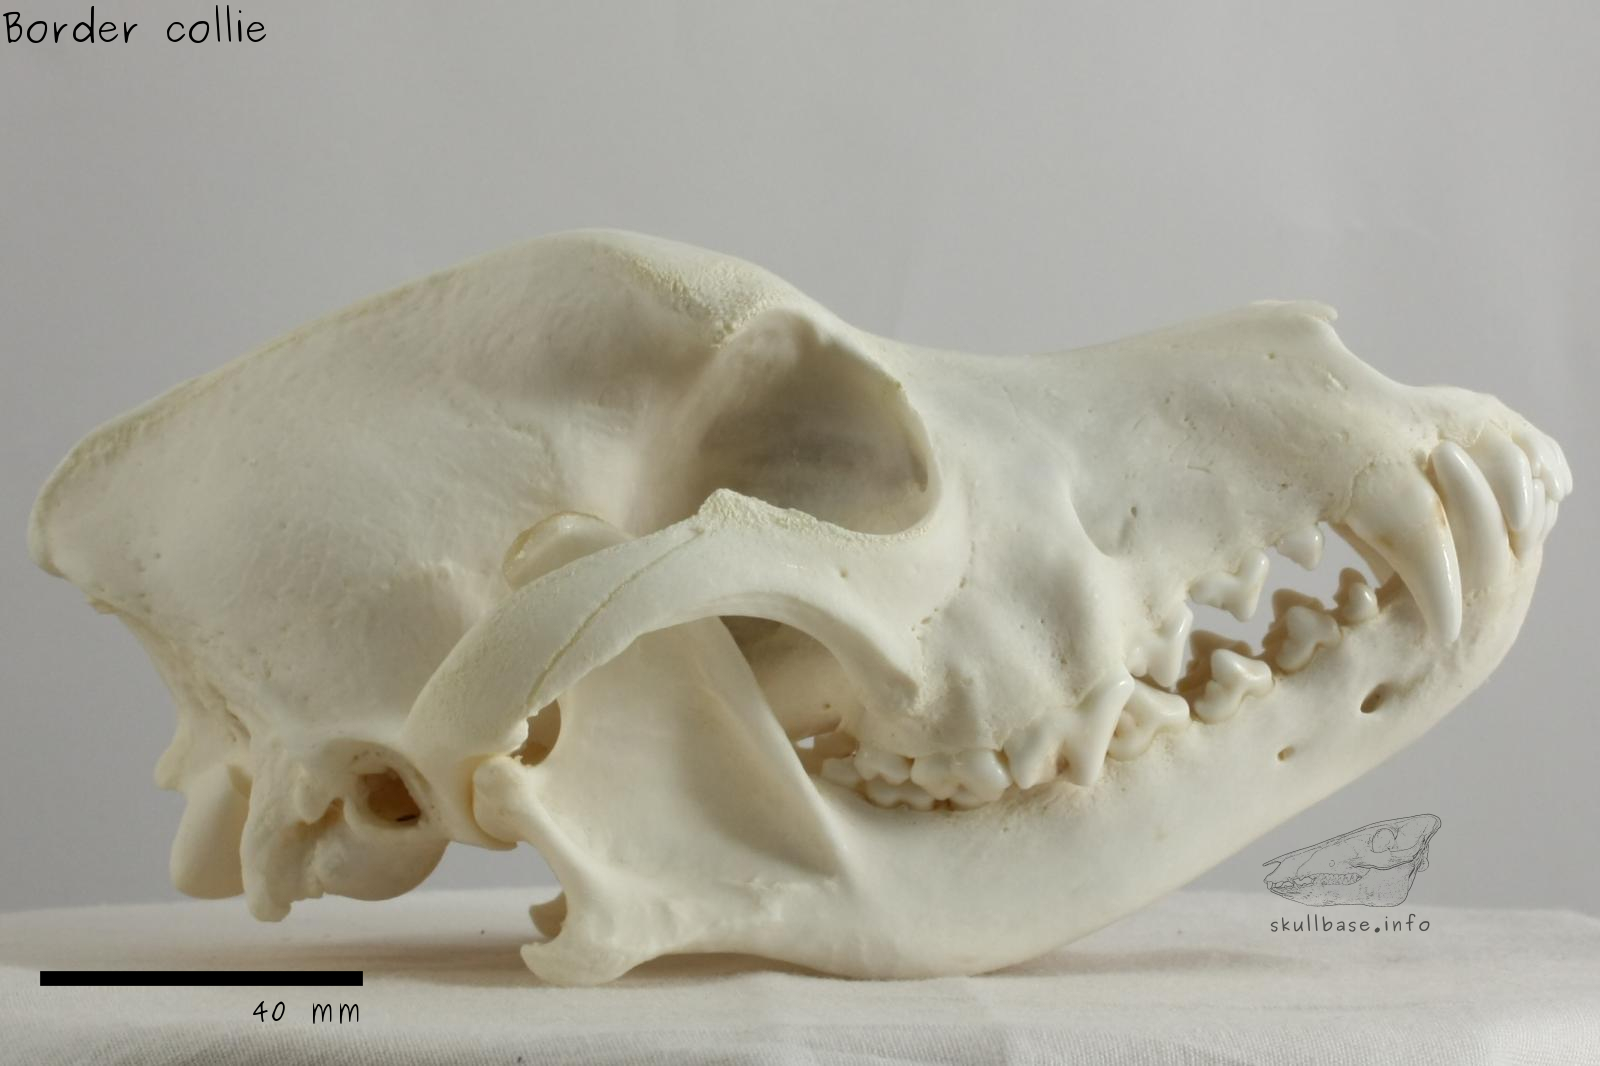 Border collie (Canis lupus familiaris) skull lateral view